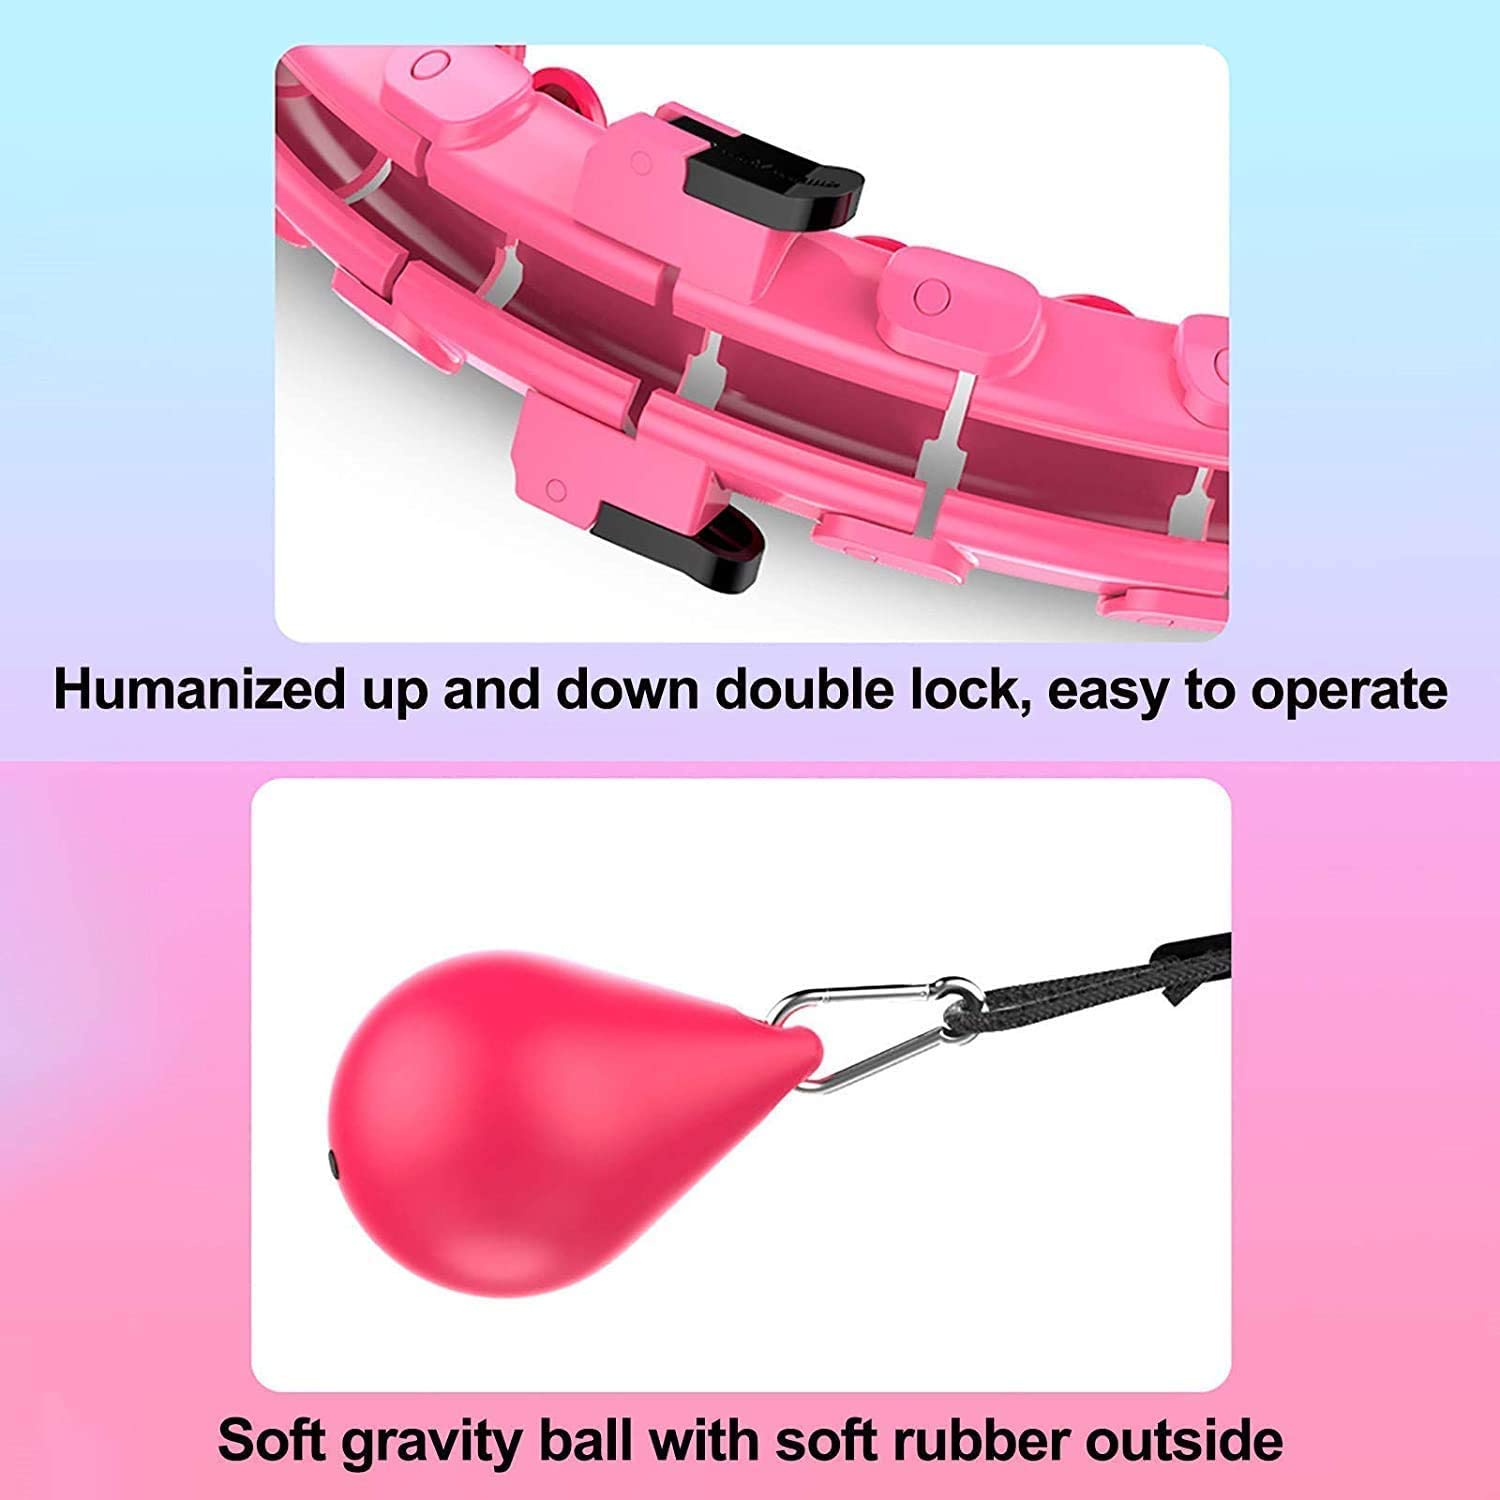 (❤Mother's Day Sale - Save 50% OFF) Smart Weighted Hula